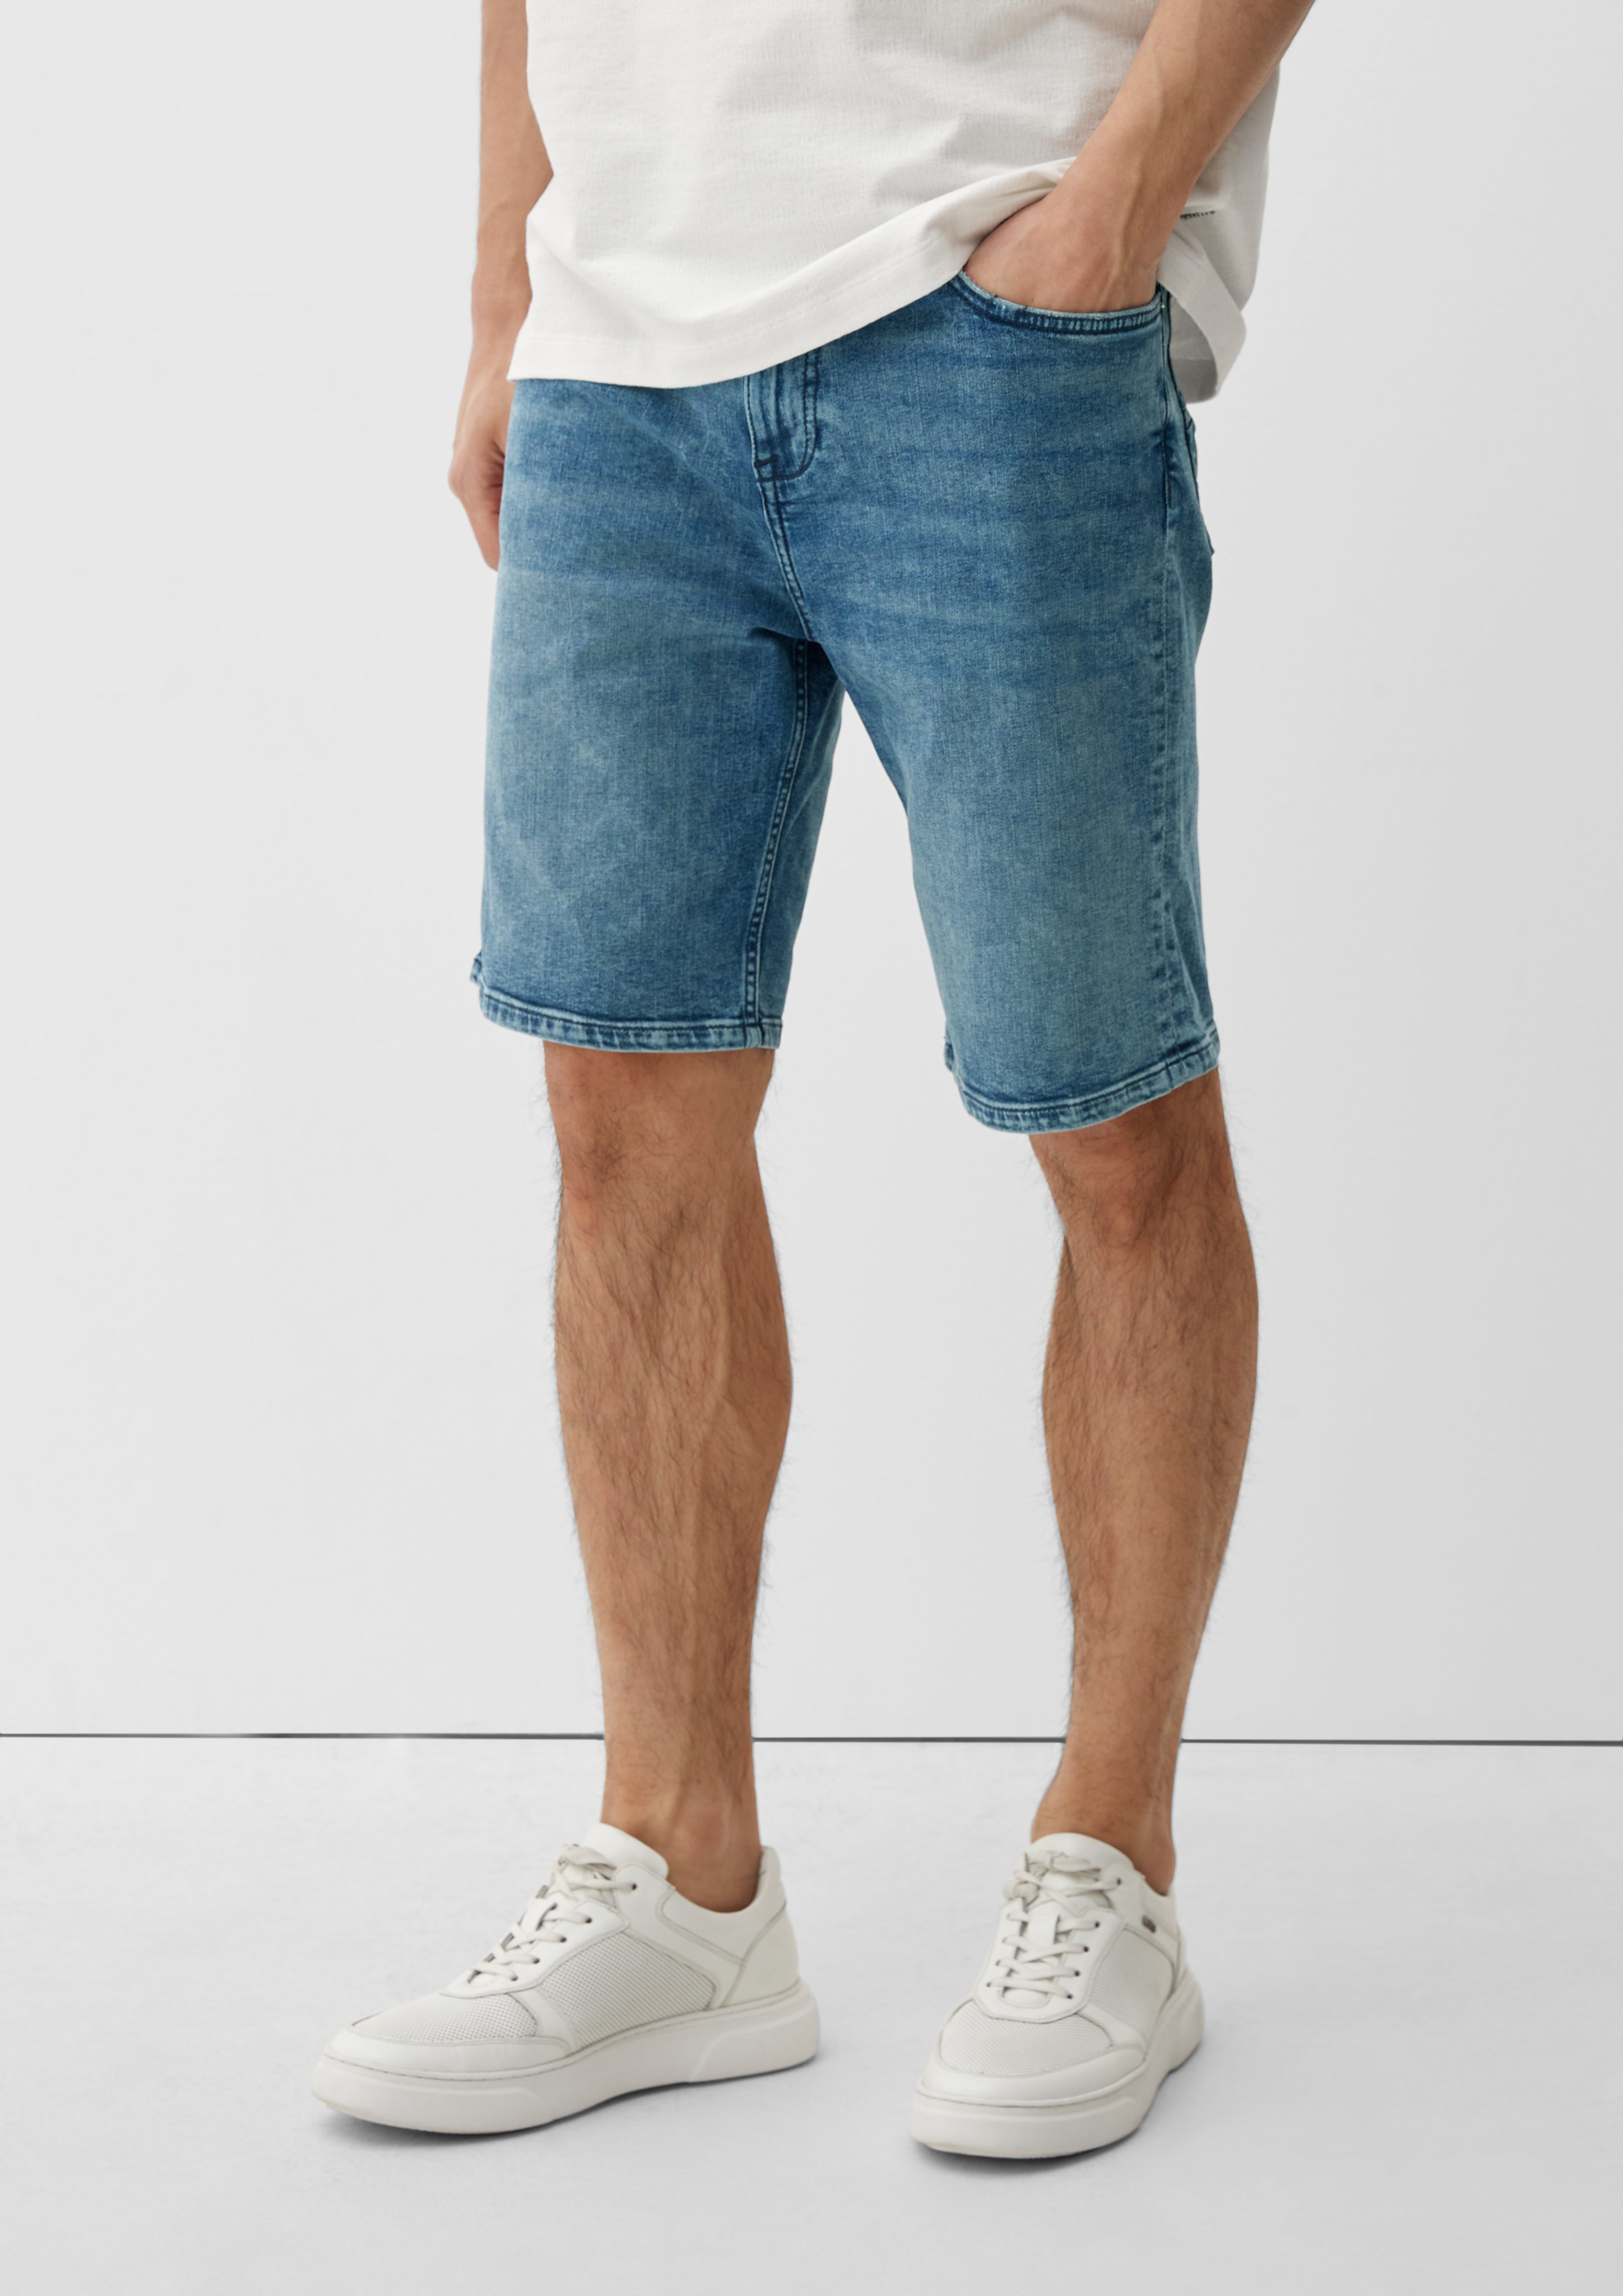 Keith Jeans / s.Oliver Leg Slim Mid Straight / Jeansshorts Rise himmelblau / Fit